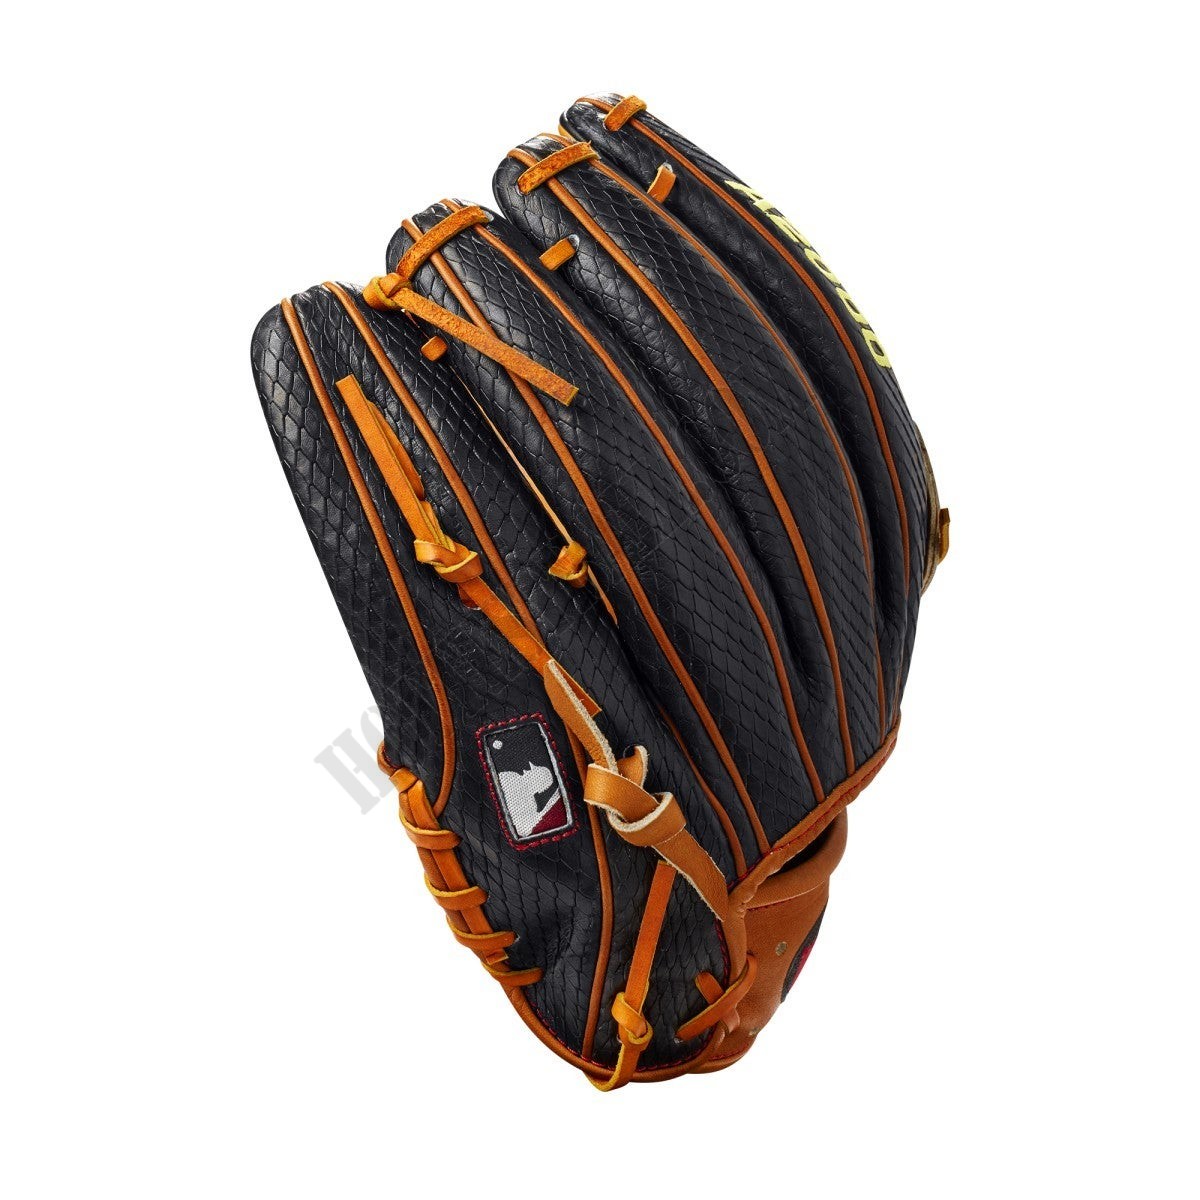 2021 A2000 DW5 12" Infield Baseball Glove -  Limited Edition ● Wilson Promotions - -4